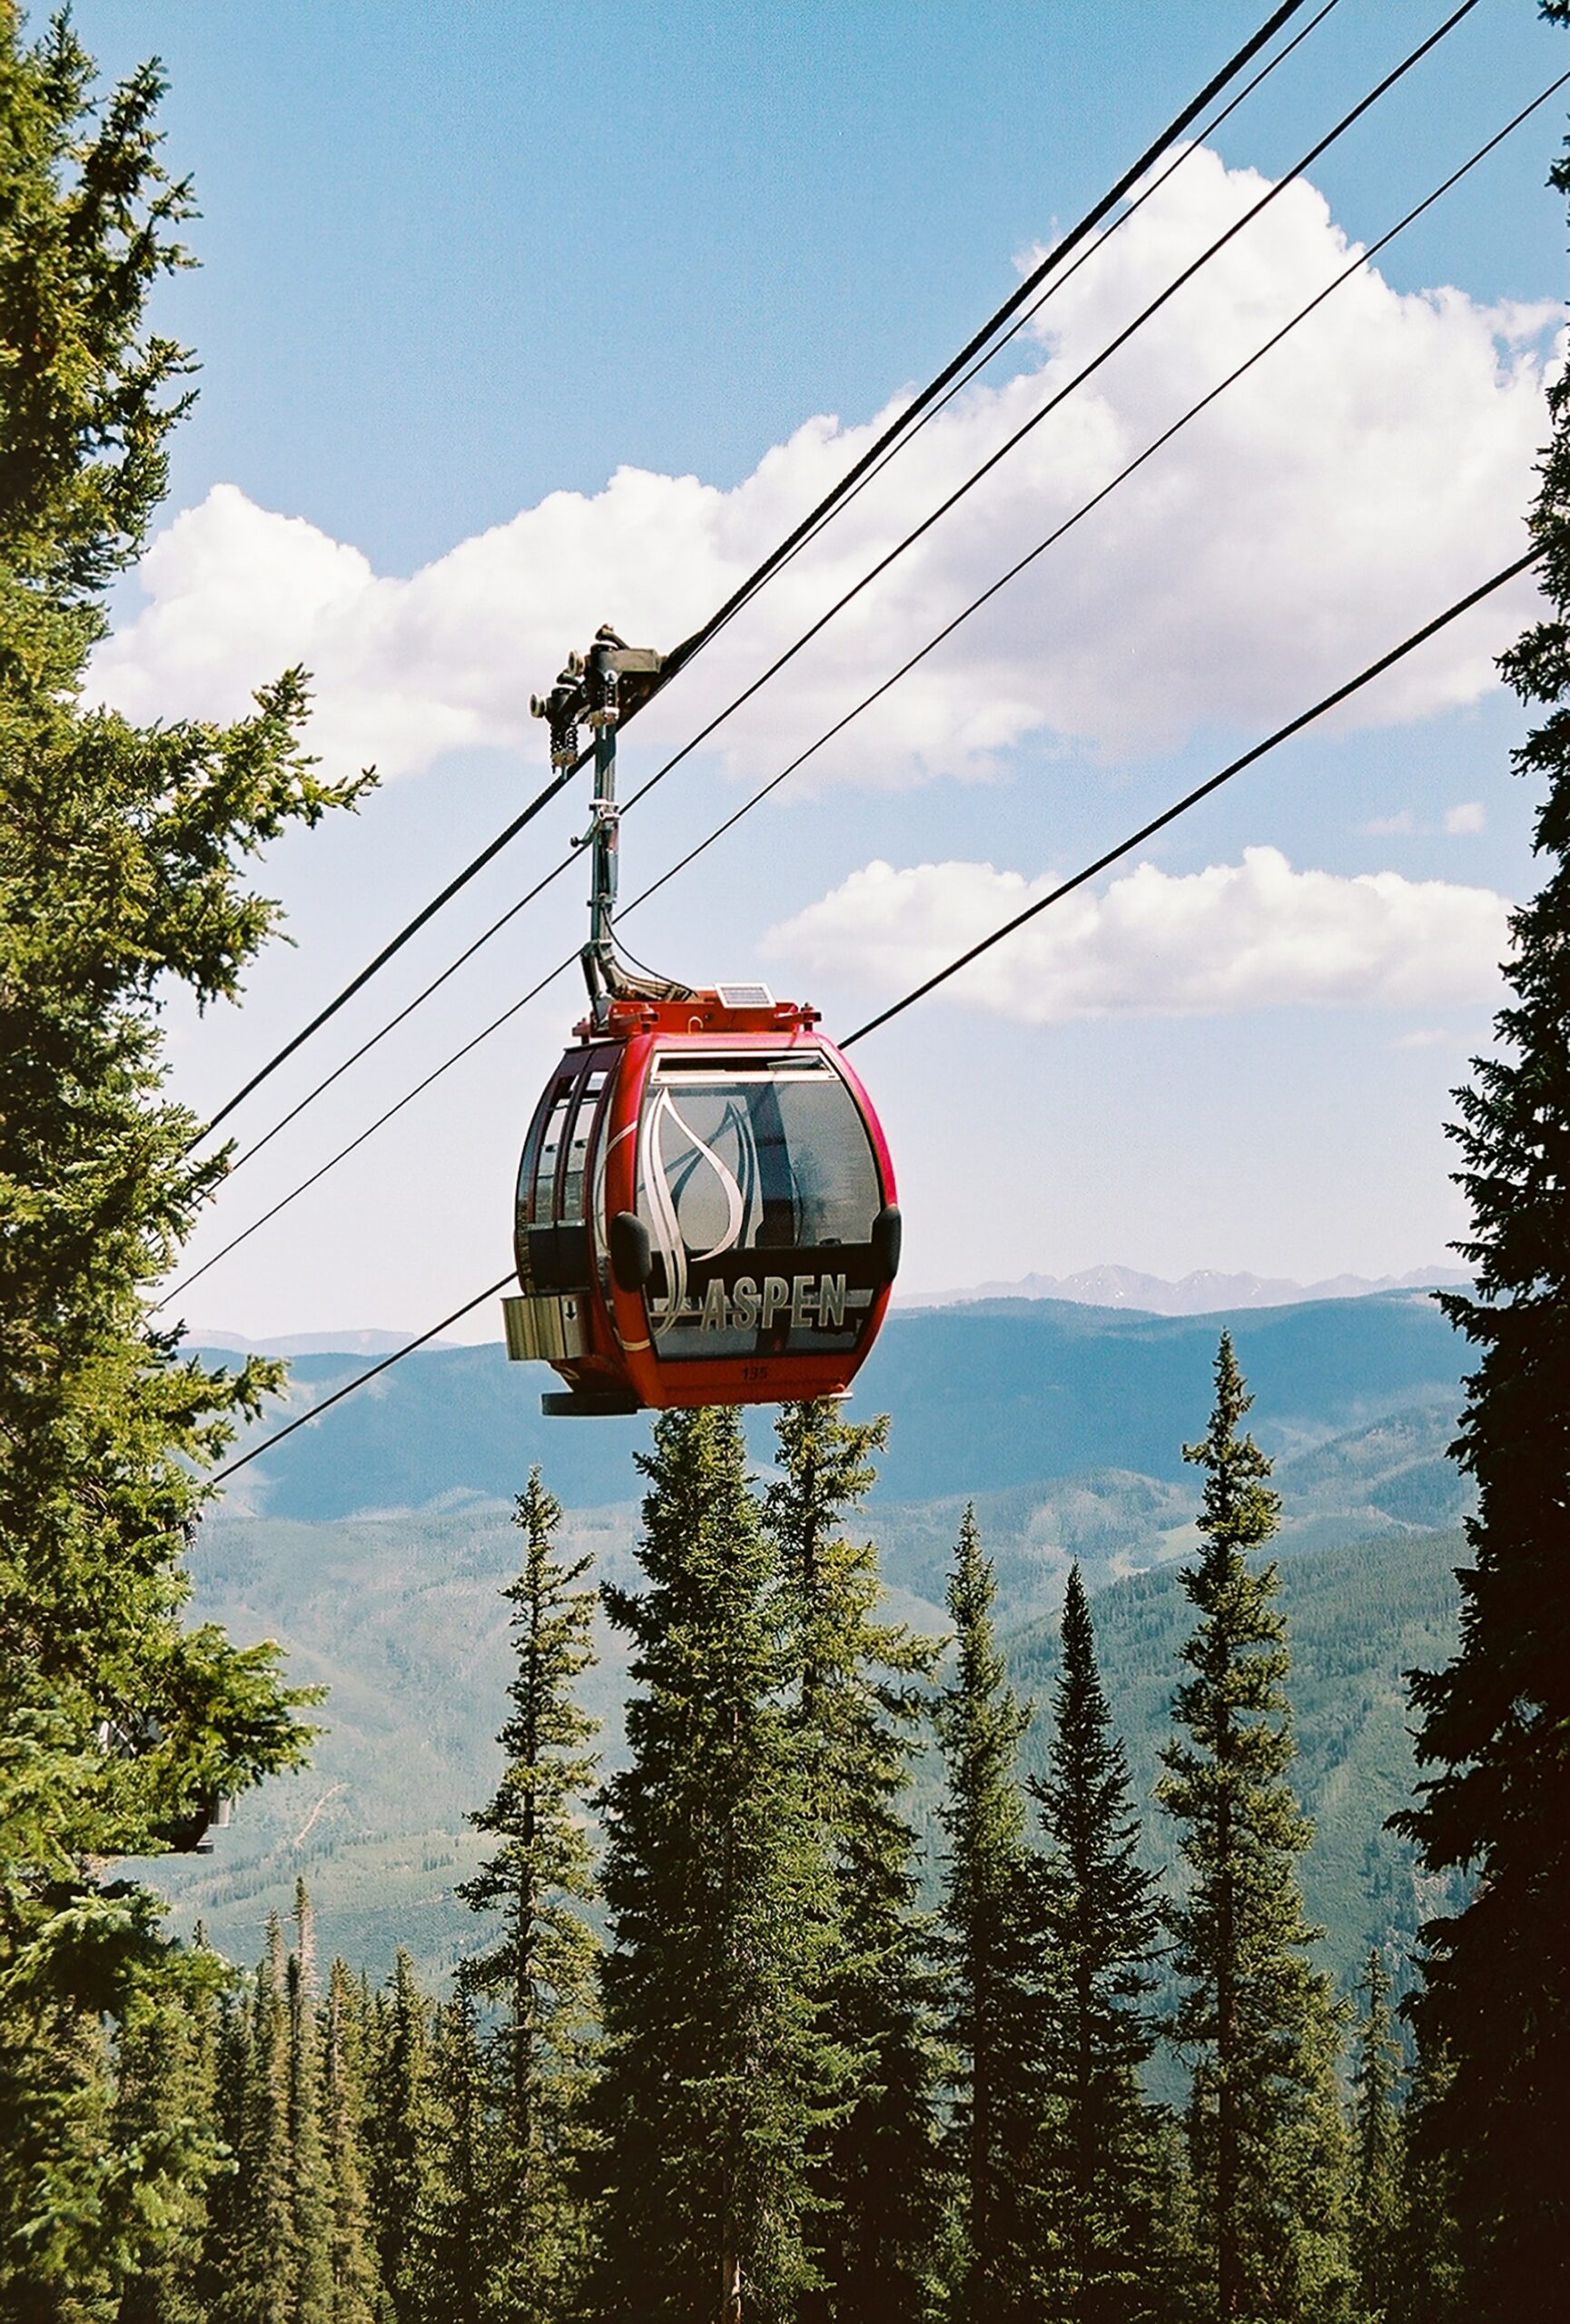 Discover the Ultimate Guide to Things to Do in Aspen and Make the Most of Your Trip